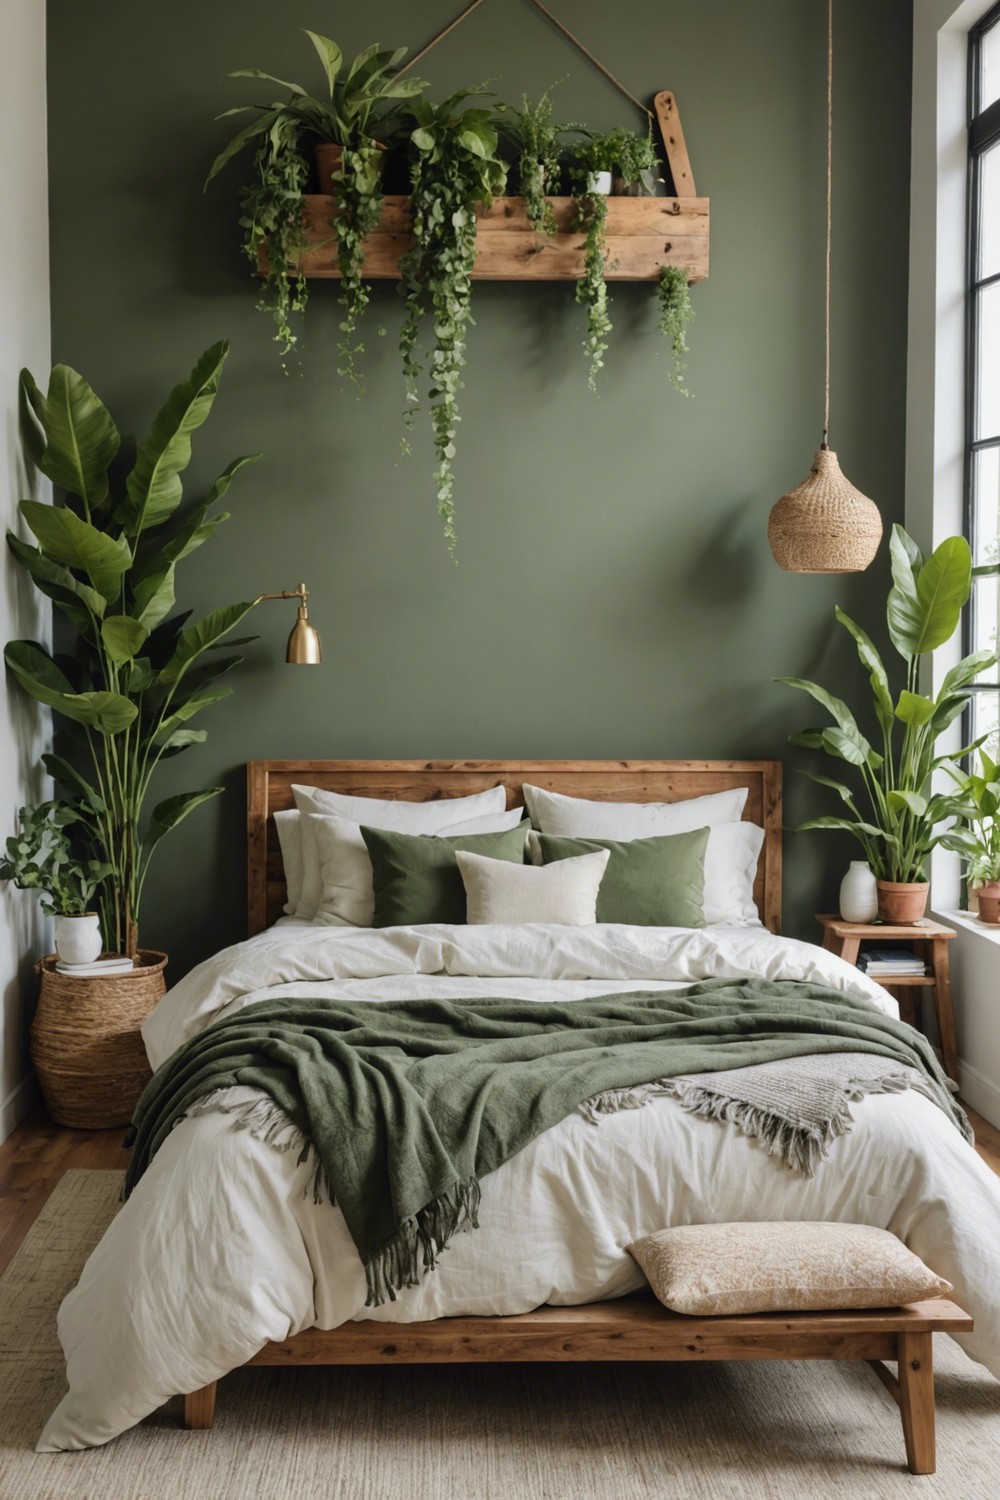 Mix and Match Sage Green with Neutrals